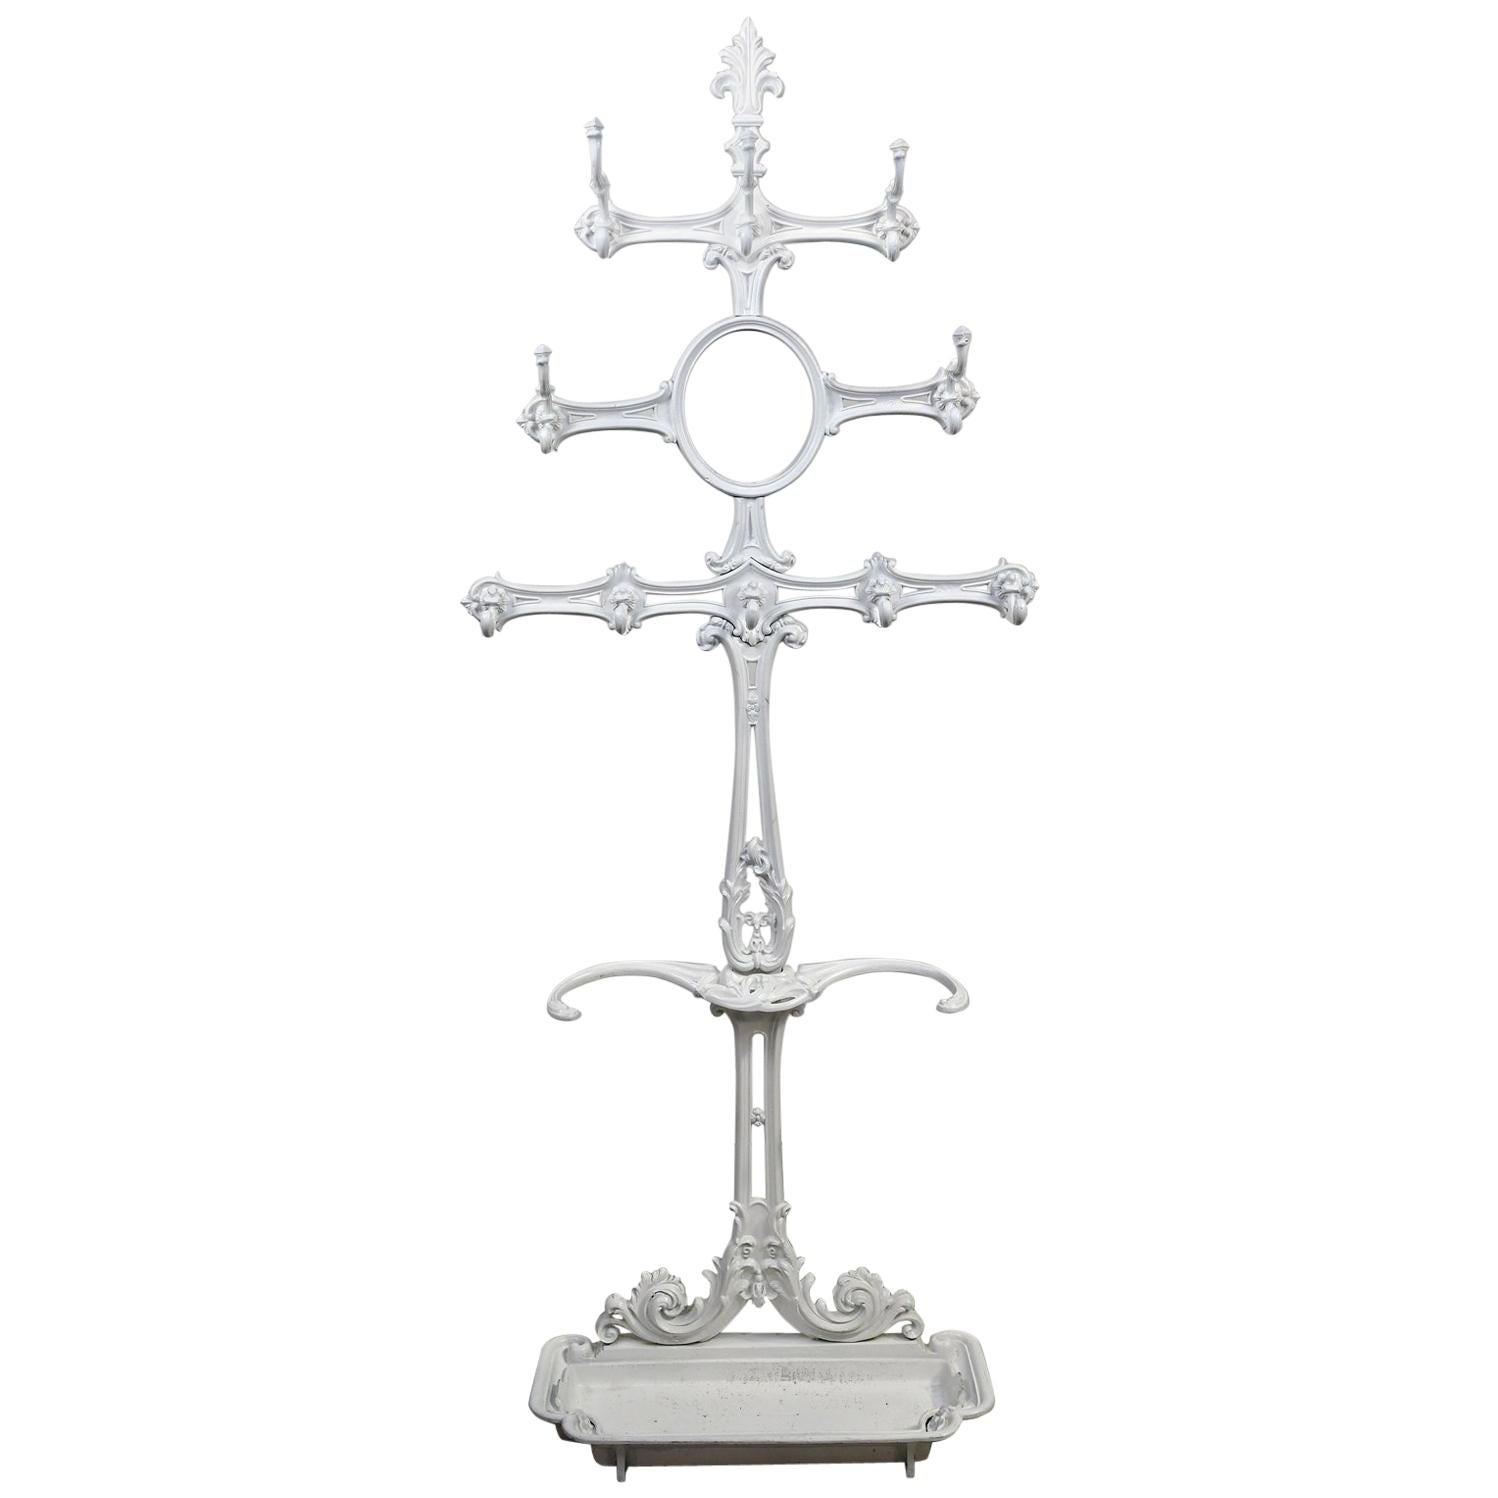 Victorian Cast Iron Coat or Hat Rack with Umbrella Stand, circa 1870 For Sale